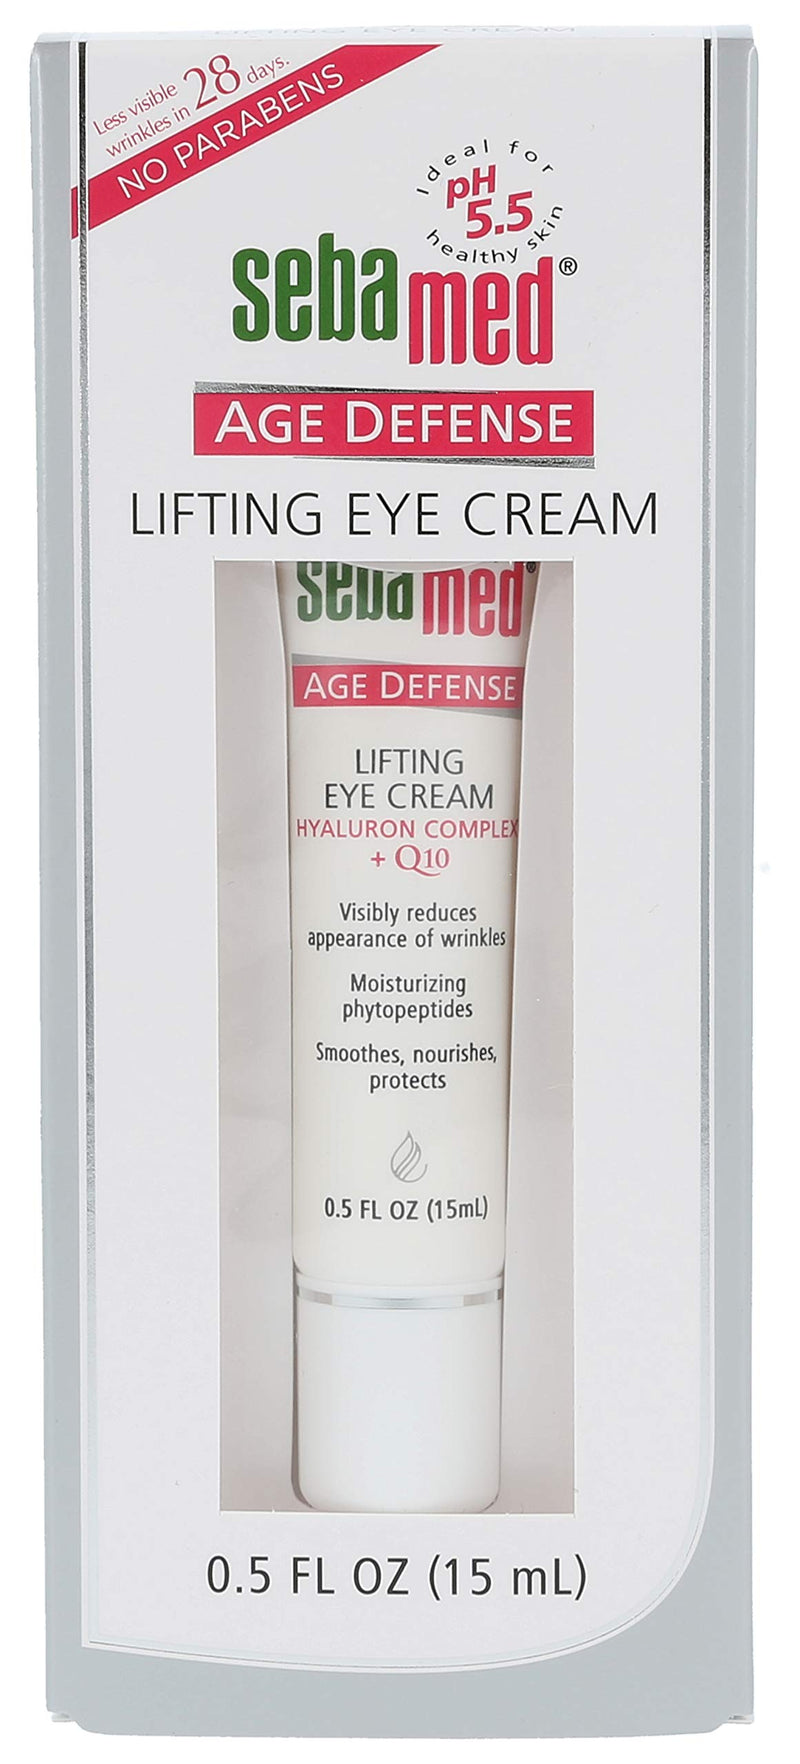 Sebamed Anti-Ageing Q10 Lifting Eye Cream with Botanical Phytosterols and lipid Complex, Visibly Reduces Appearance of Wrinkles. Paraben-Free, Dermatologist Tested & Dermatologist Developed - BeesActive Australia